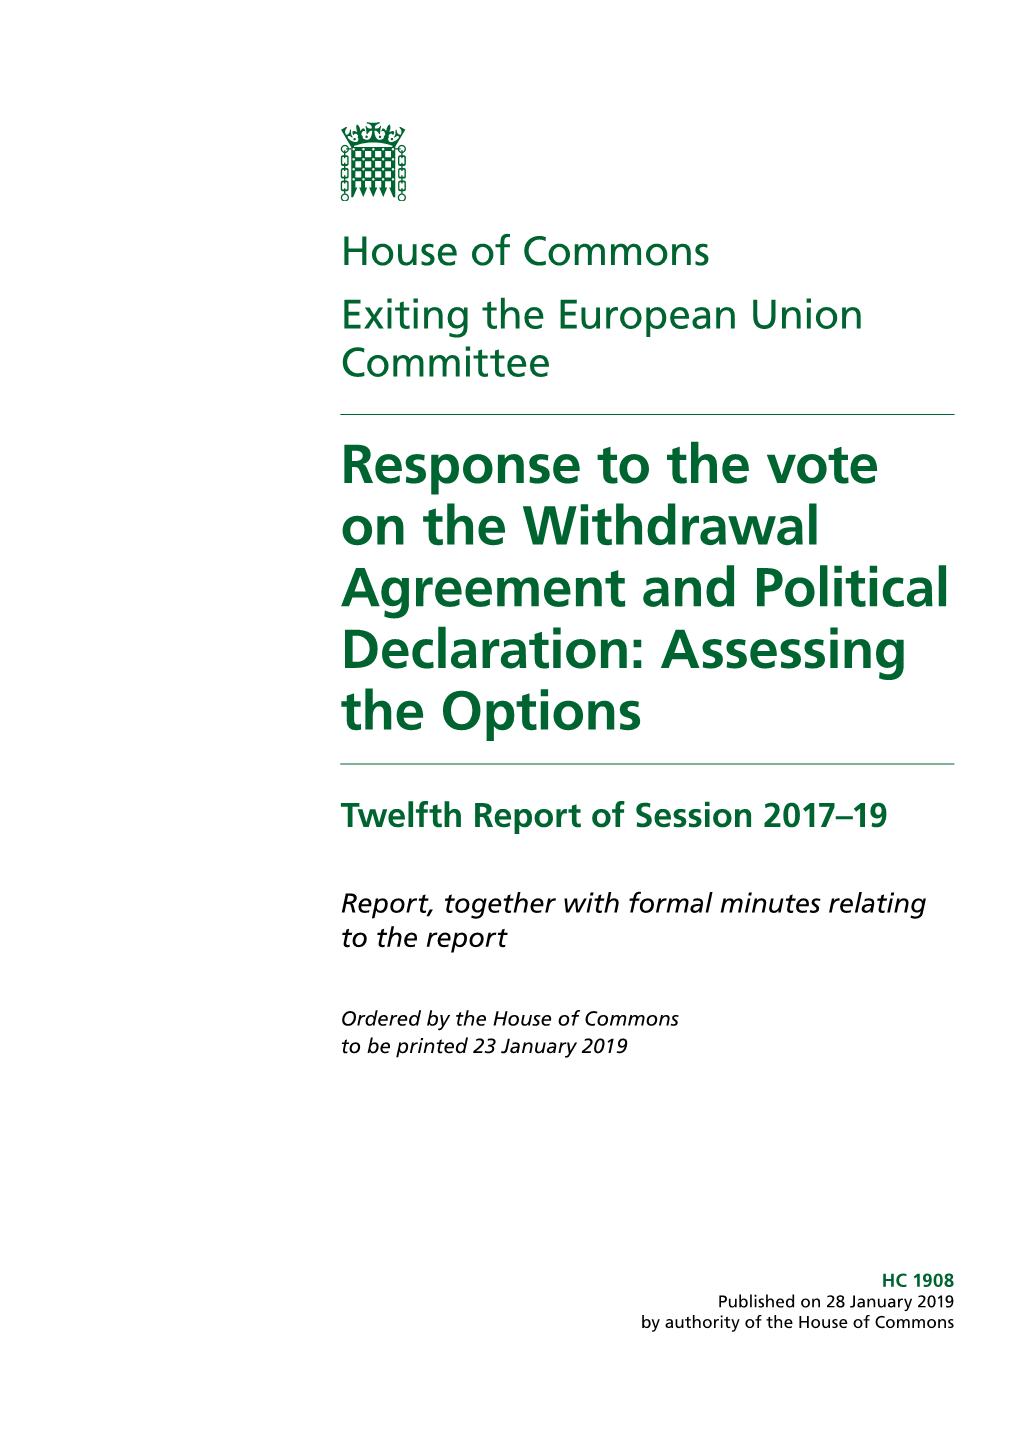 Response to the Vote on the Withdrawal Agreement and Political Declaration: Assessing the Options